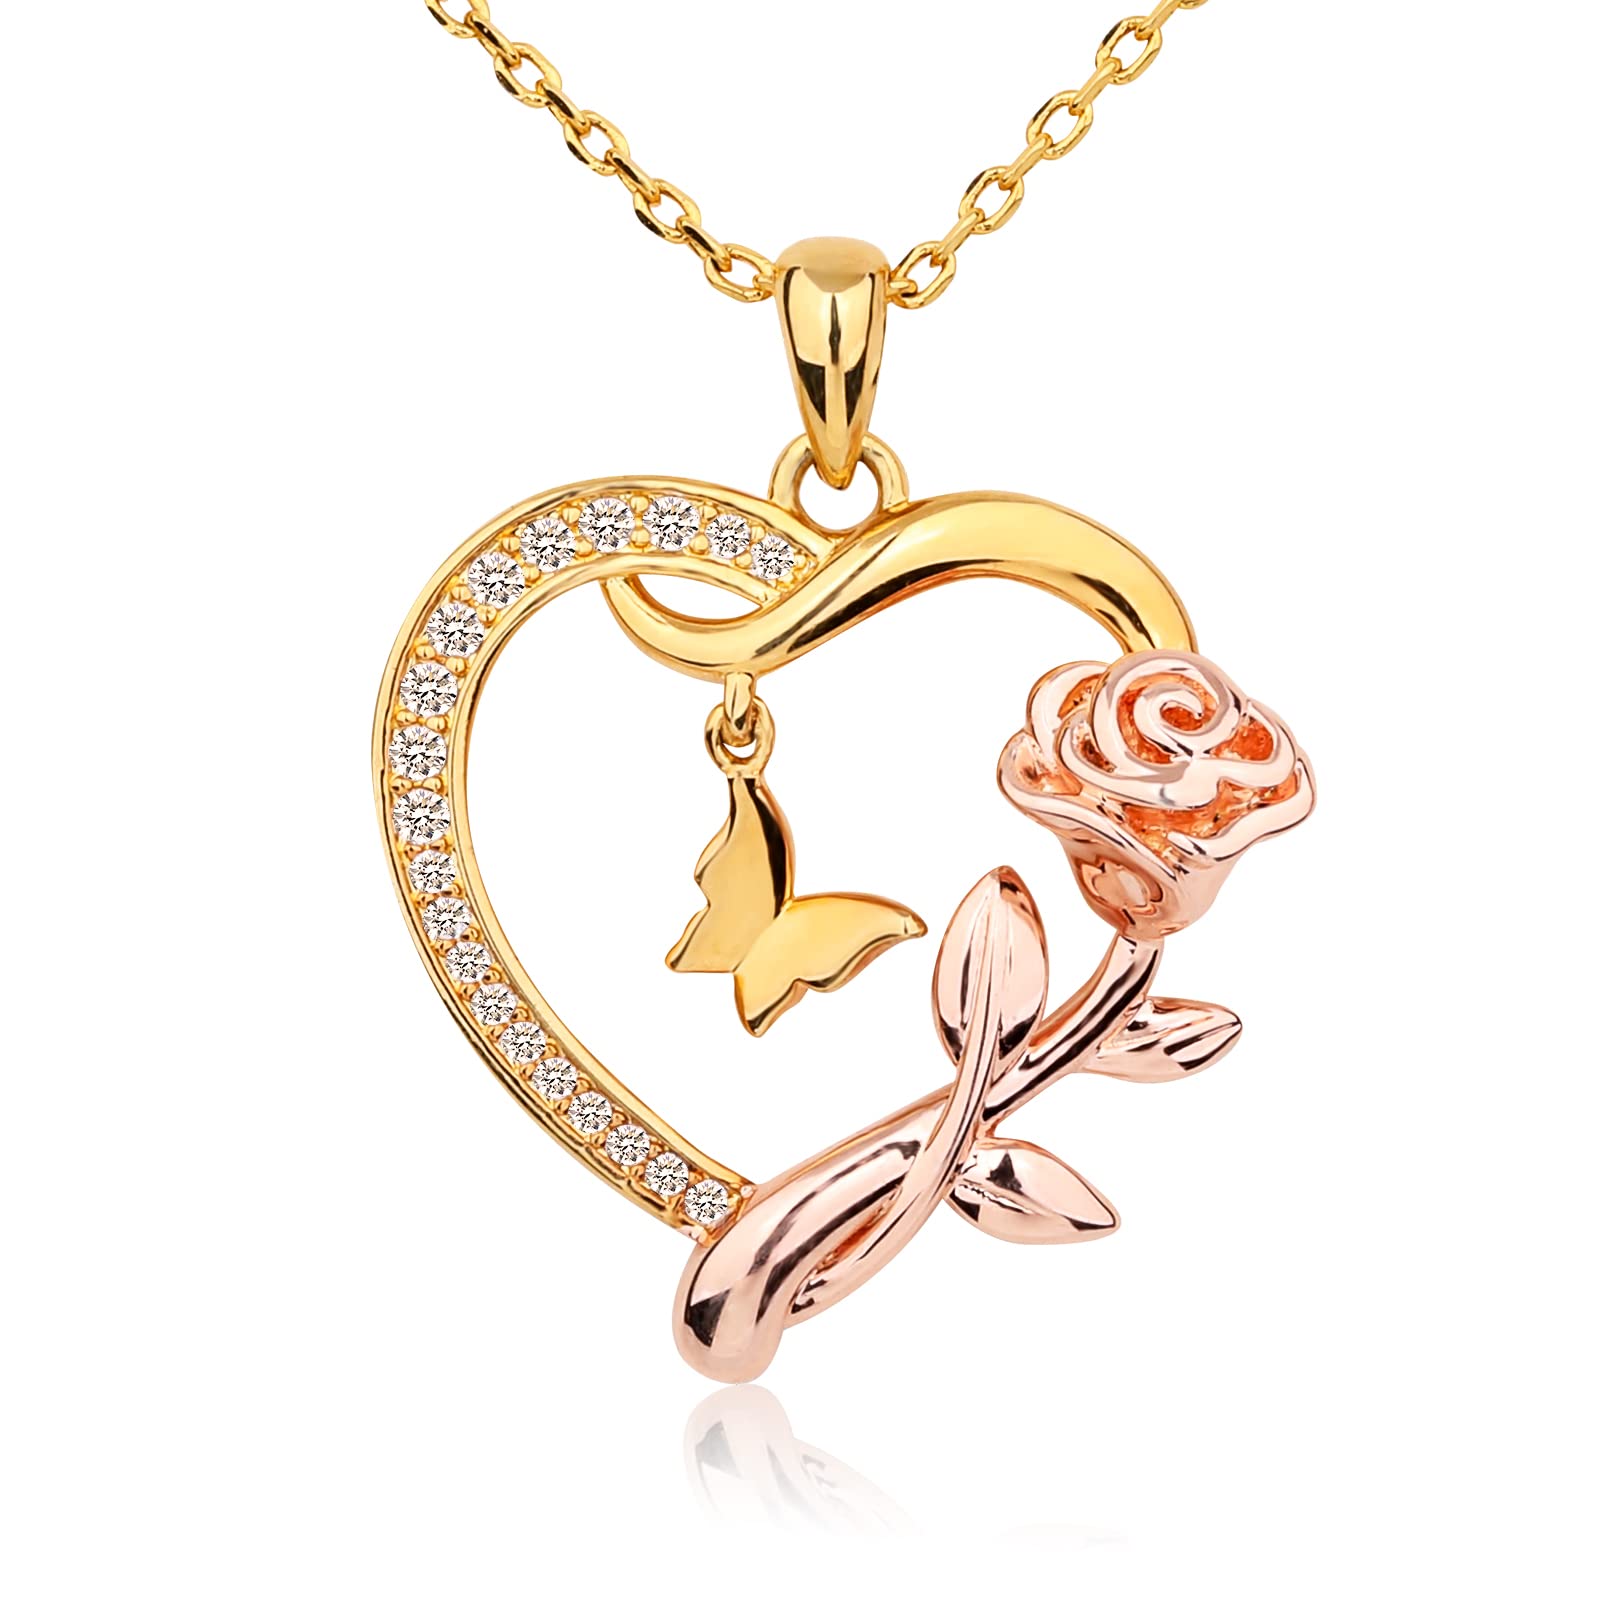 Alsanix Heart Necklace Sterling Silver/14k Gold Plated/Rose Gold Necklaces for Women Butterfly Rose Pendant CZ Jewelry Birthday Gift for Girls